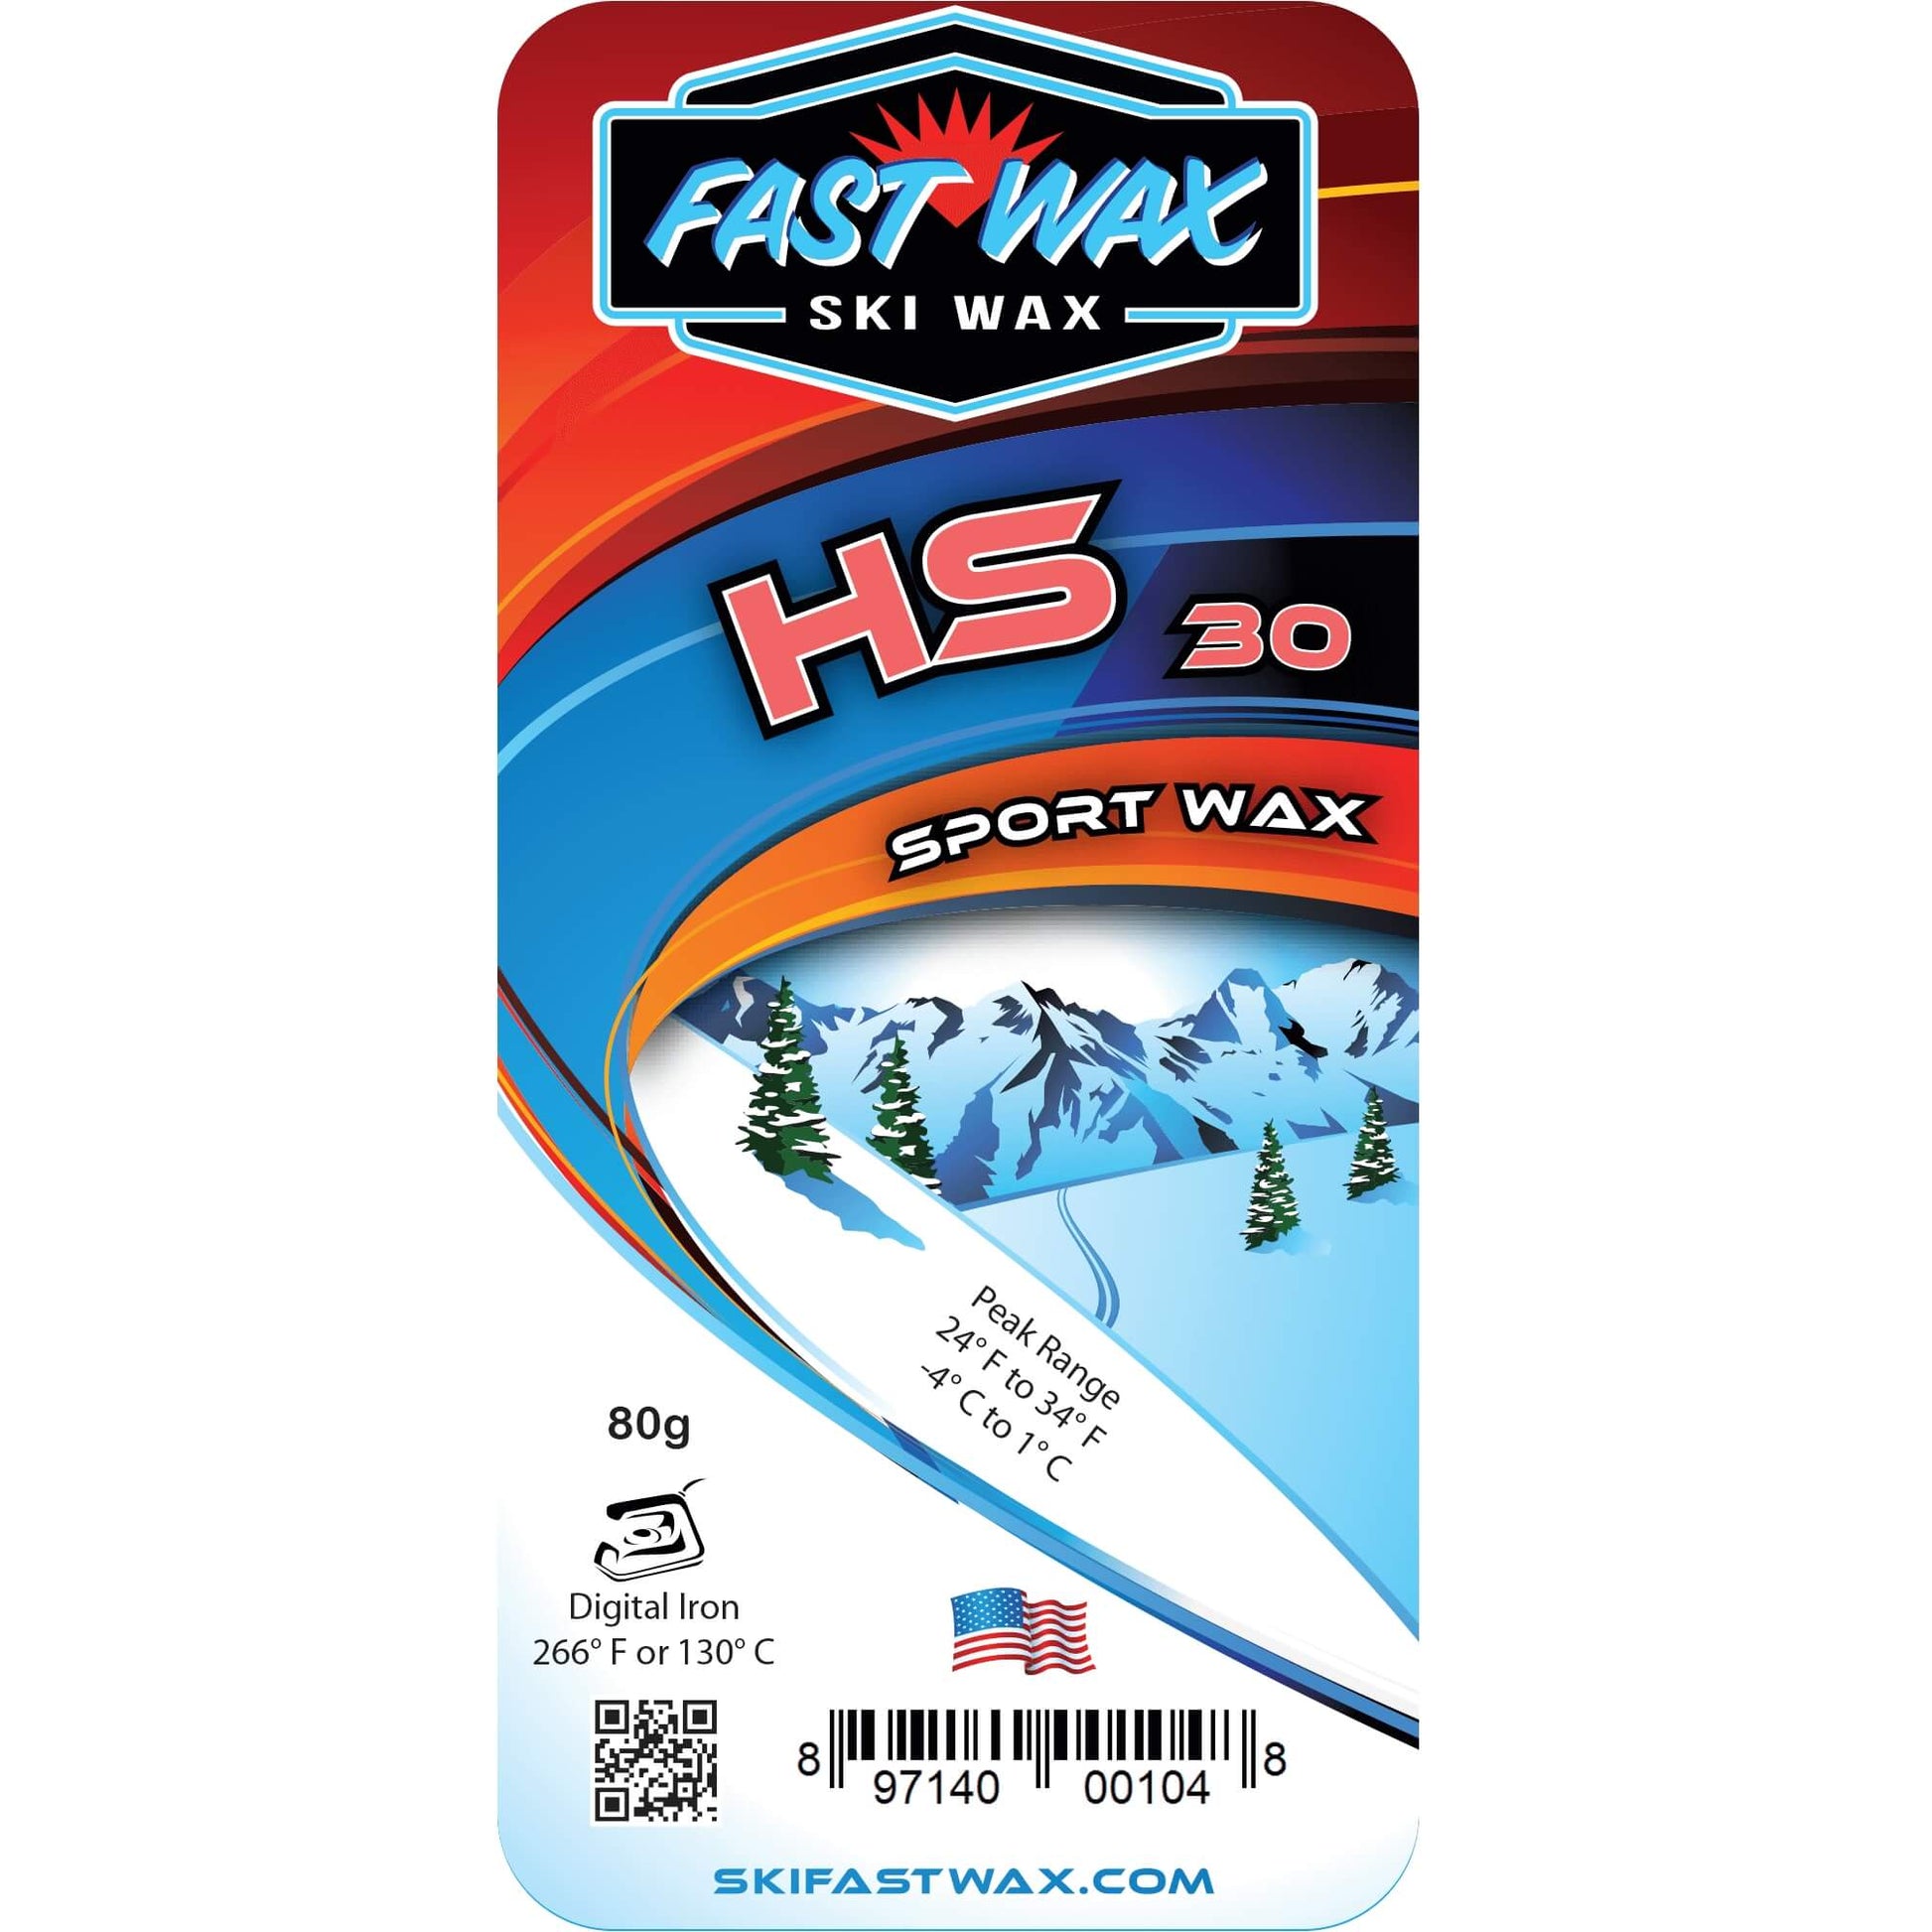 Paraffin ski wax for skiing or boarding, fast and durable – Fast Wax